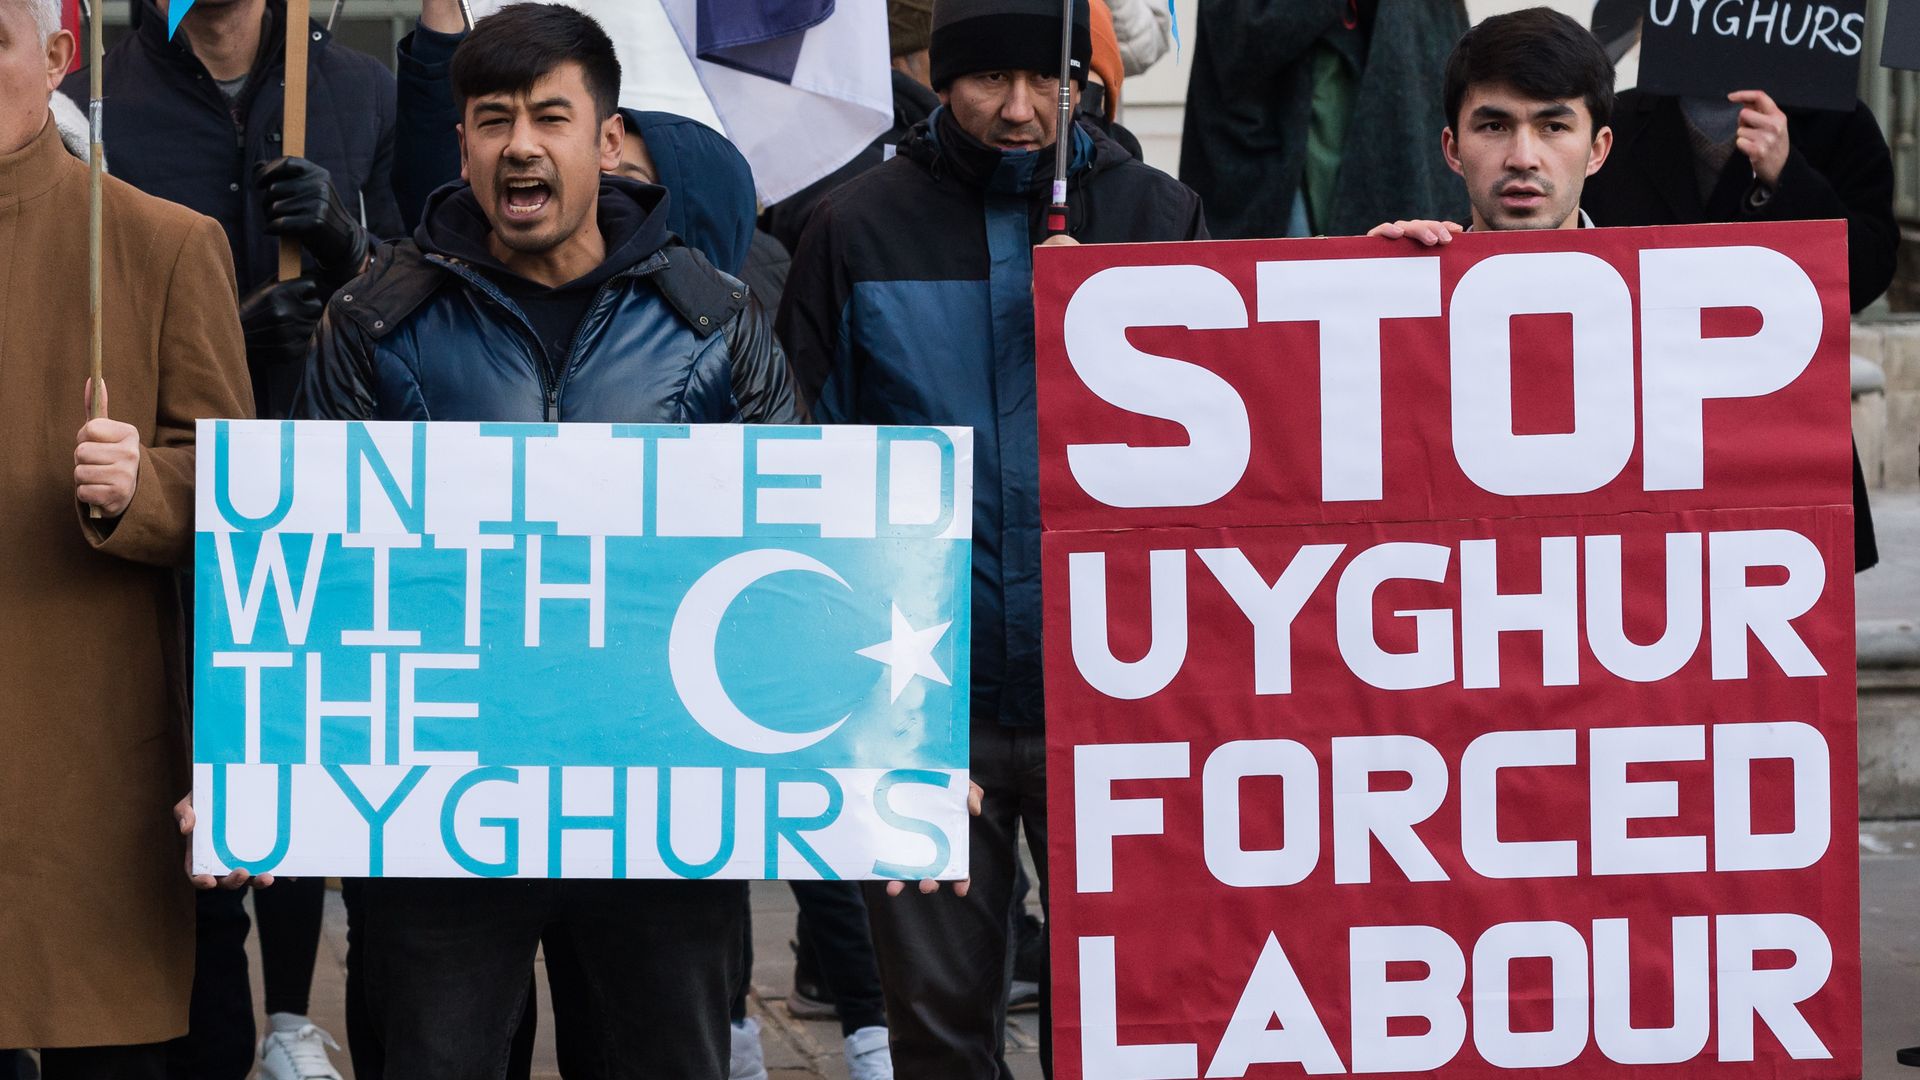 Uyghurs rally outside the Chinese Embassy in London last December